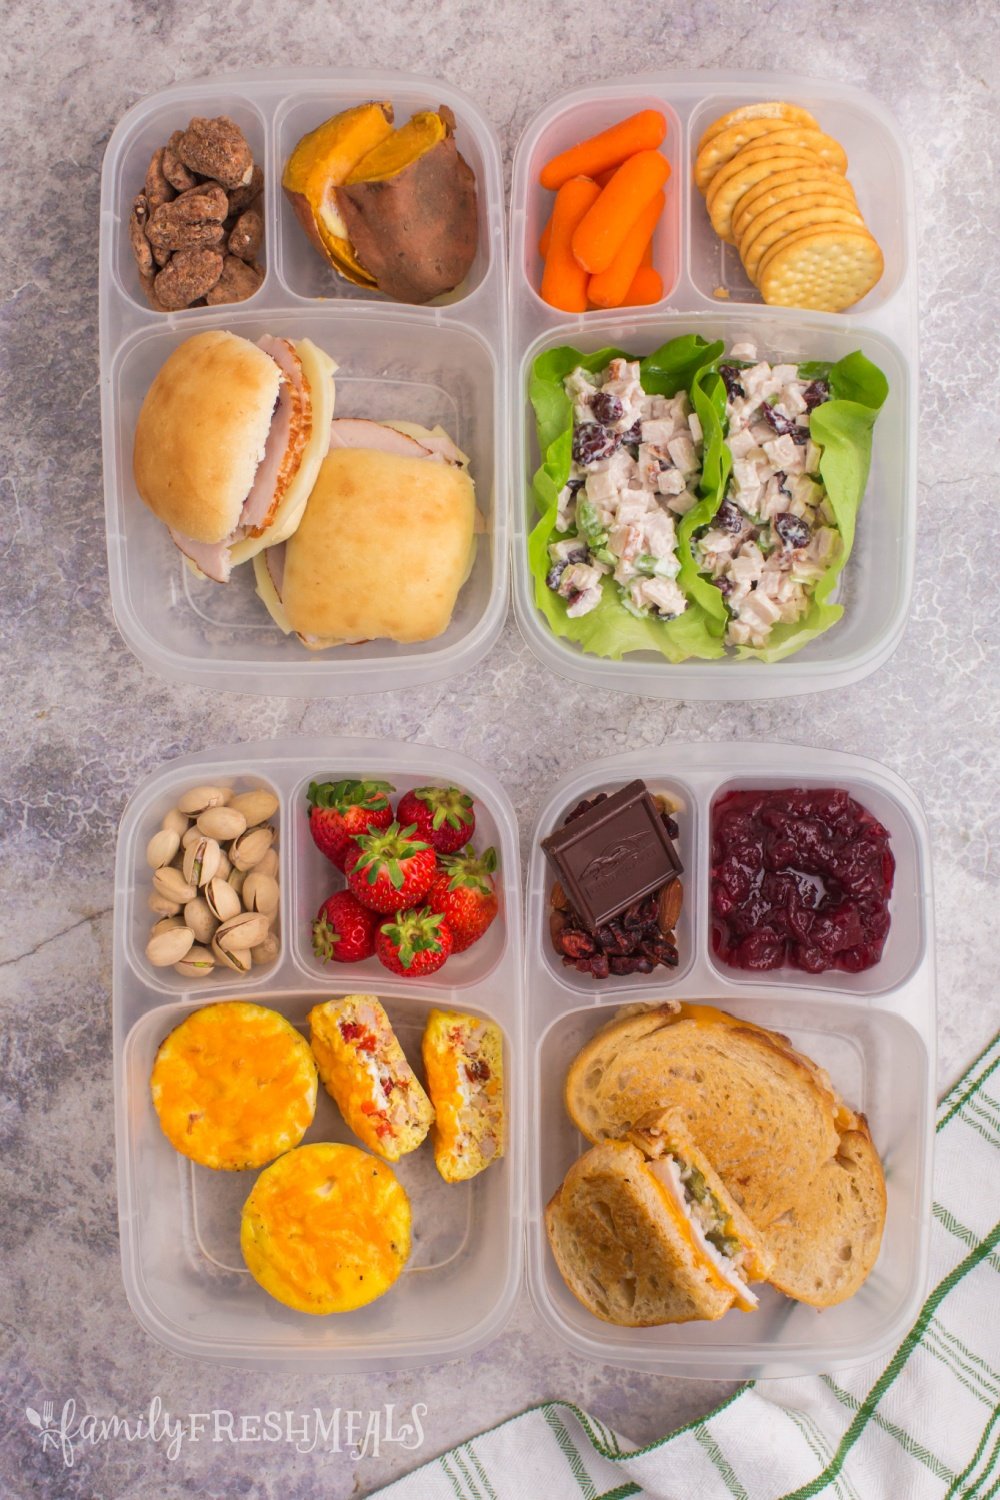 Rather than just serve up a rerun of Thanksgiving dinner, here are some new and fun Leftover Thanksgiving Food Lunchbox Ideas. via @familyfresh